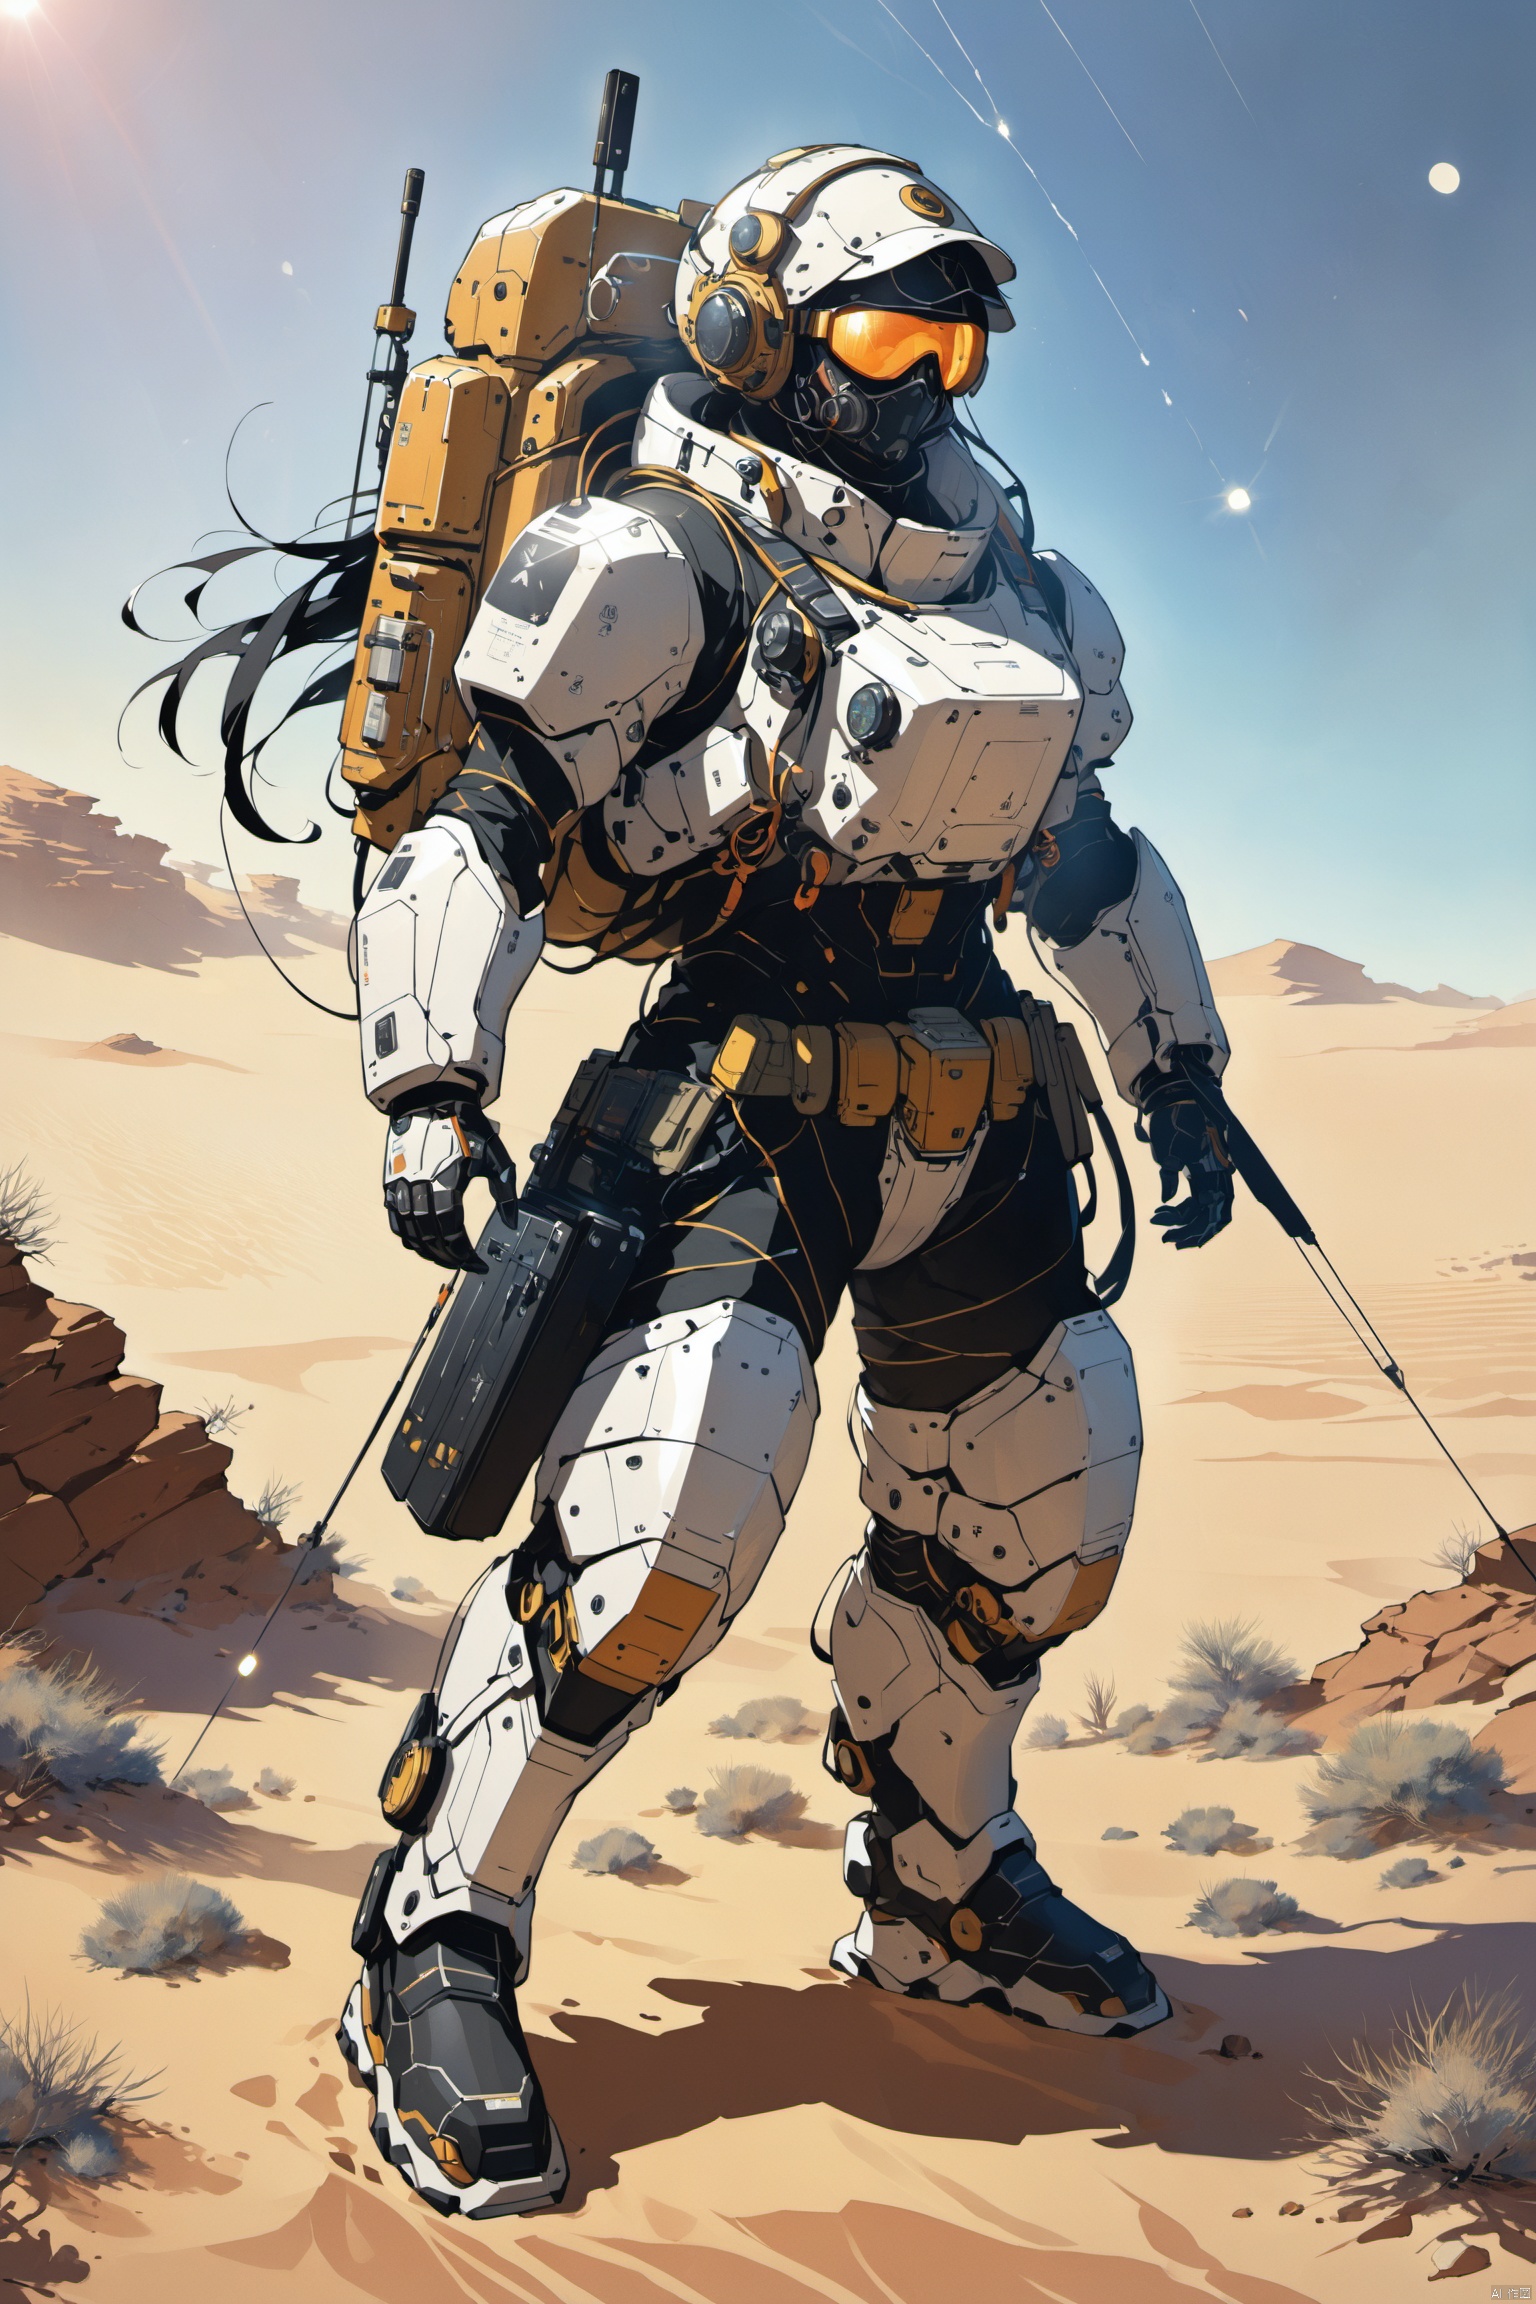 1mechanical girl, full-body portrayal, desert environment, sand dunes stretching afar, metallic exoskeleton reflecting sunlight, solar-powered systems, integrated cooling vents, hydraulic joints, multifunctional tools built into limbs, ruggedized tread-like feet, desert goggles, moisture-recycling apparatus, weathered finish suggesting prolonged exposure to harsh conditions, energy-efficient design, limited edition survival gear, navigational sensors, scanning the horizon for resources or threats, hint of artificial intelligence displayed through expressive LED lights, fusion of human and machine aesthetics, enduring solitude, symbolizing innovation and adaptability against extreme adversity((anime art style)), ((poakl)), eastern mythology